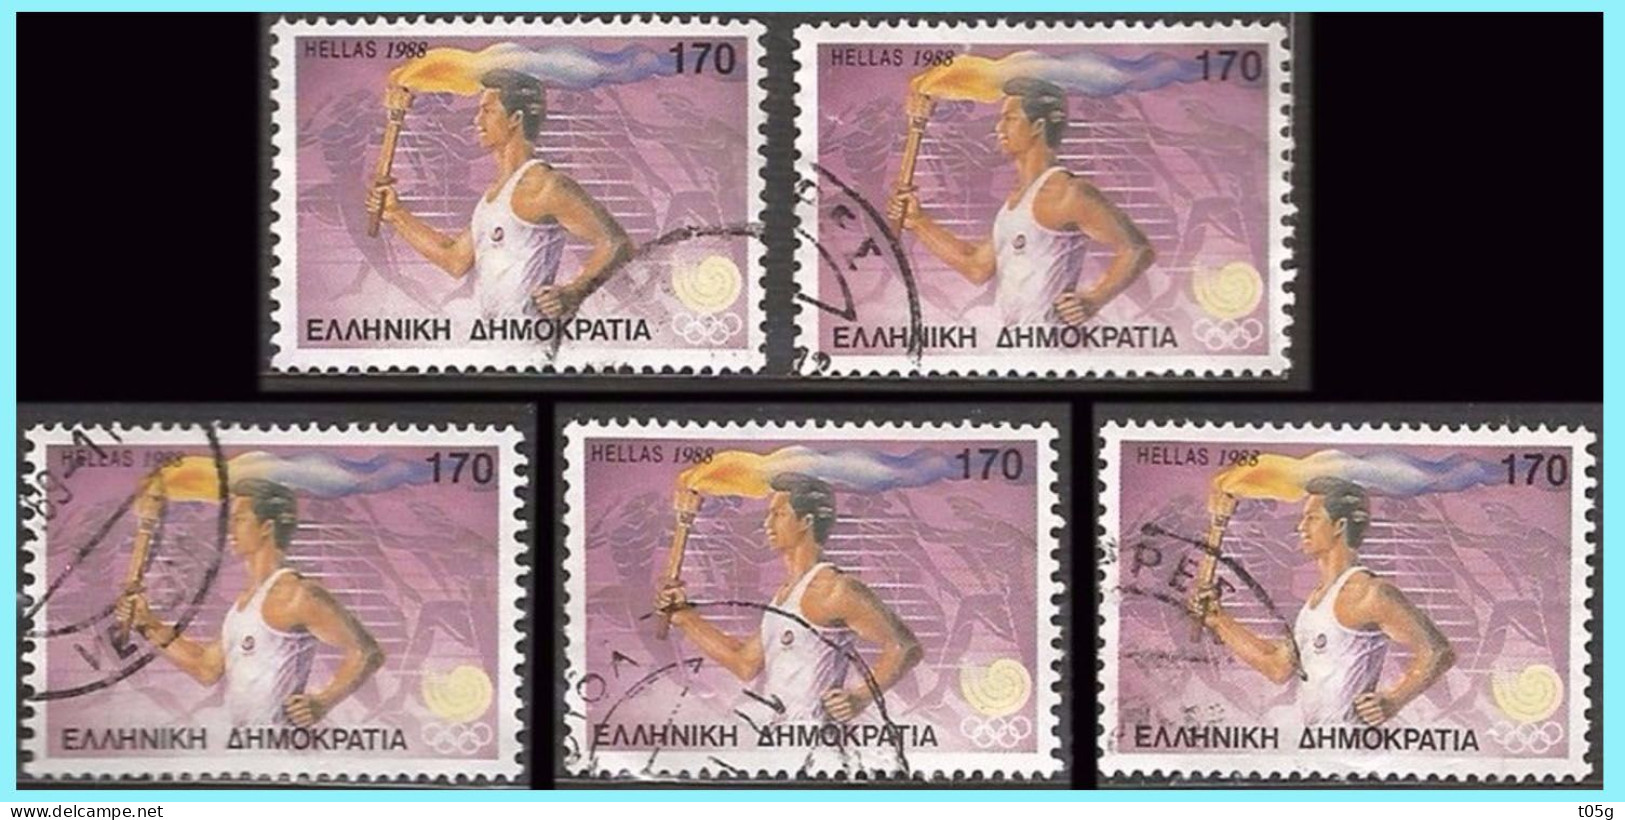 GREECE- GRECE-HELLAS 1988: Five Stamps In 170drx Olympic Cames Seoul Used - Used Stamps